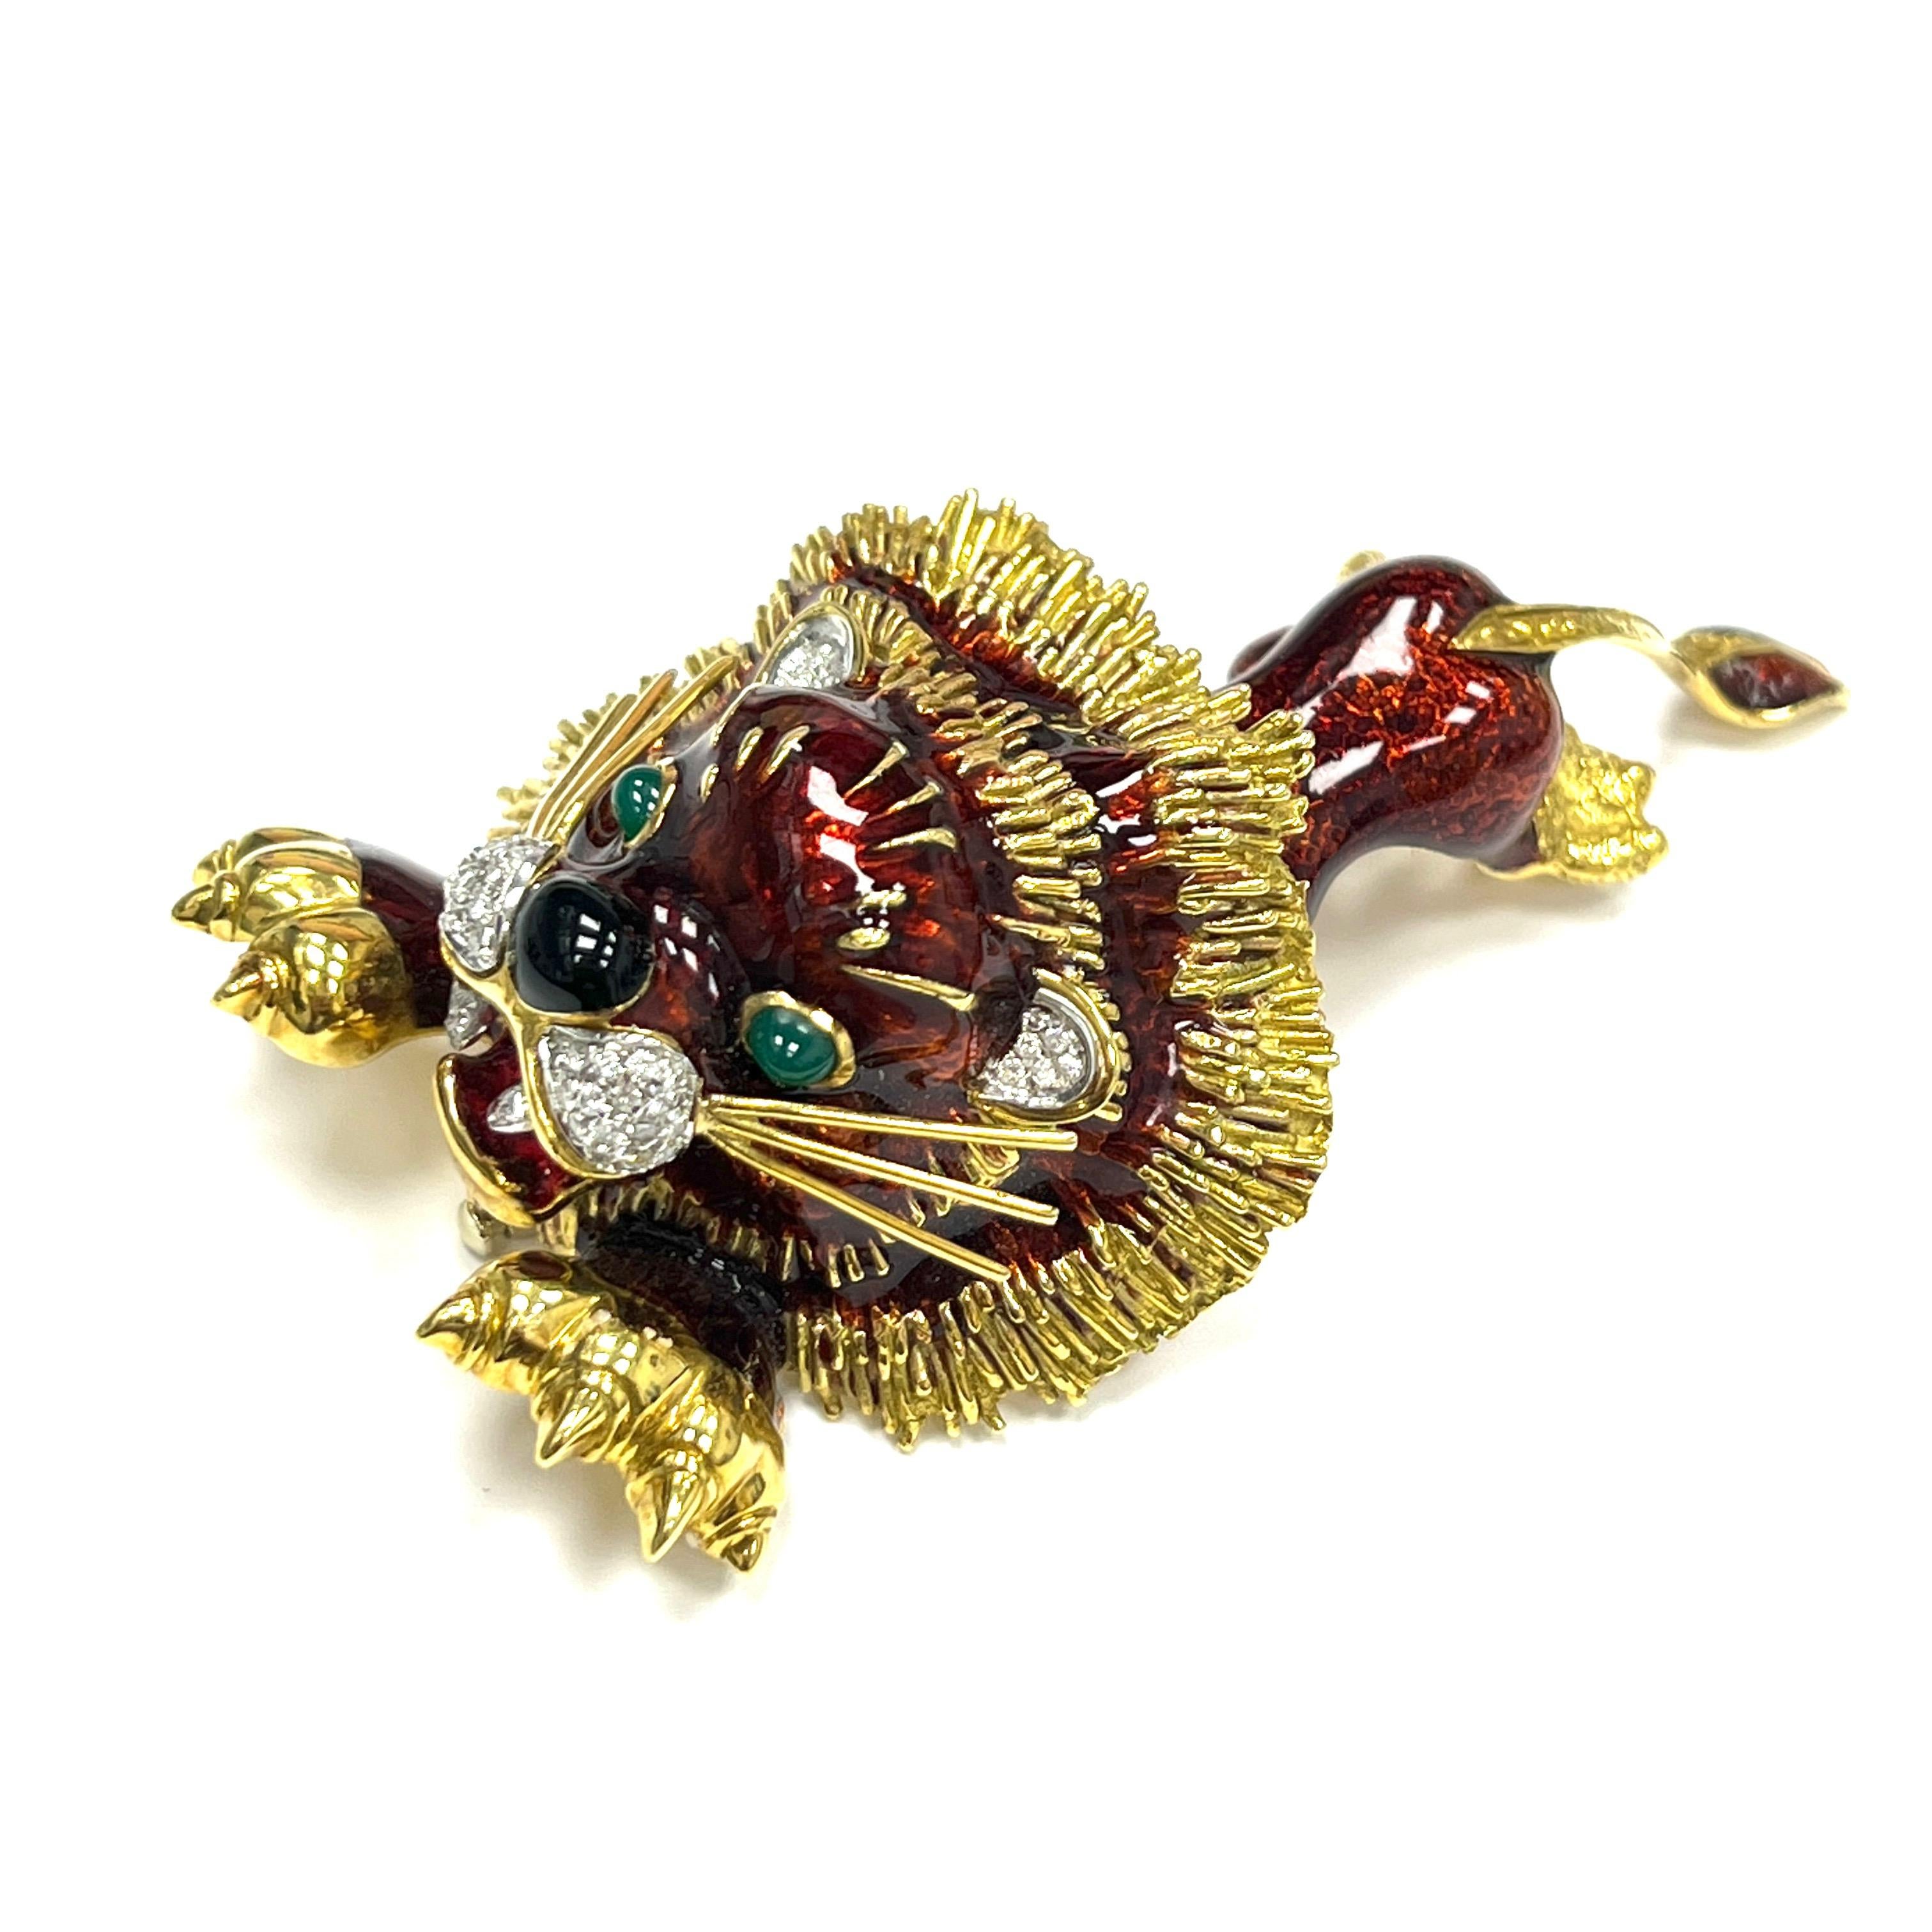 Red enamel lion brooch, Italian

Cabochon emeralds, round-cut diamonds, red and black enamel, 18 karat yellow gold; marked Italy, 18k

Size: width 1.75 inches, length 3.5 inches
Total weight: 62.7 grams